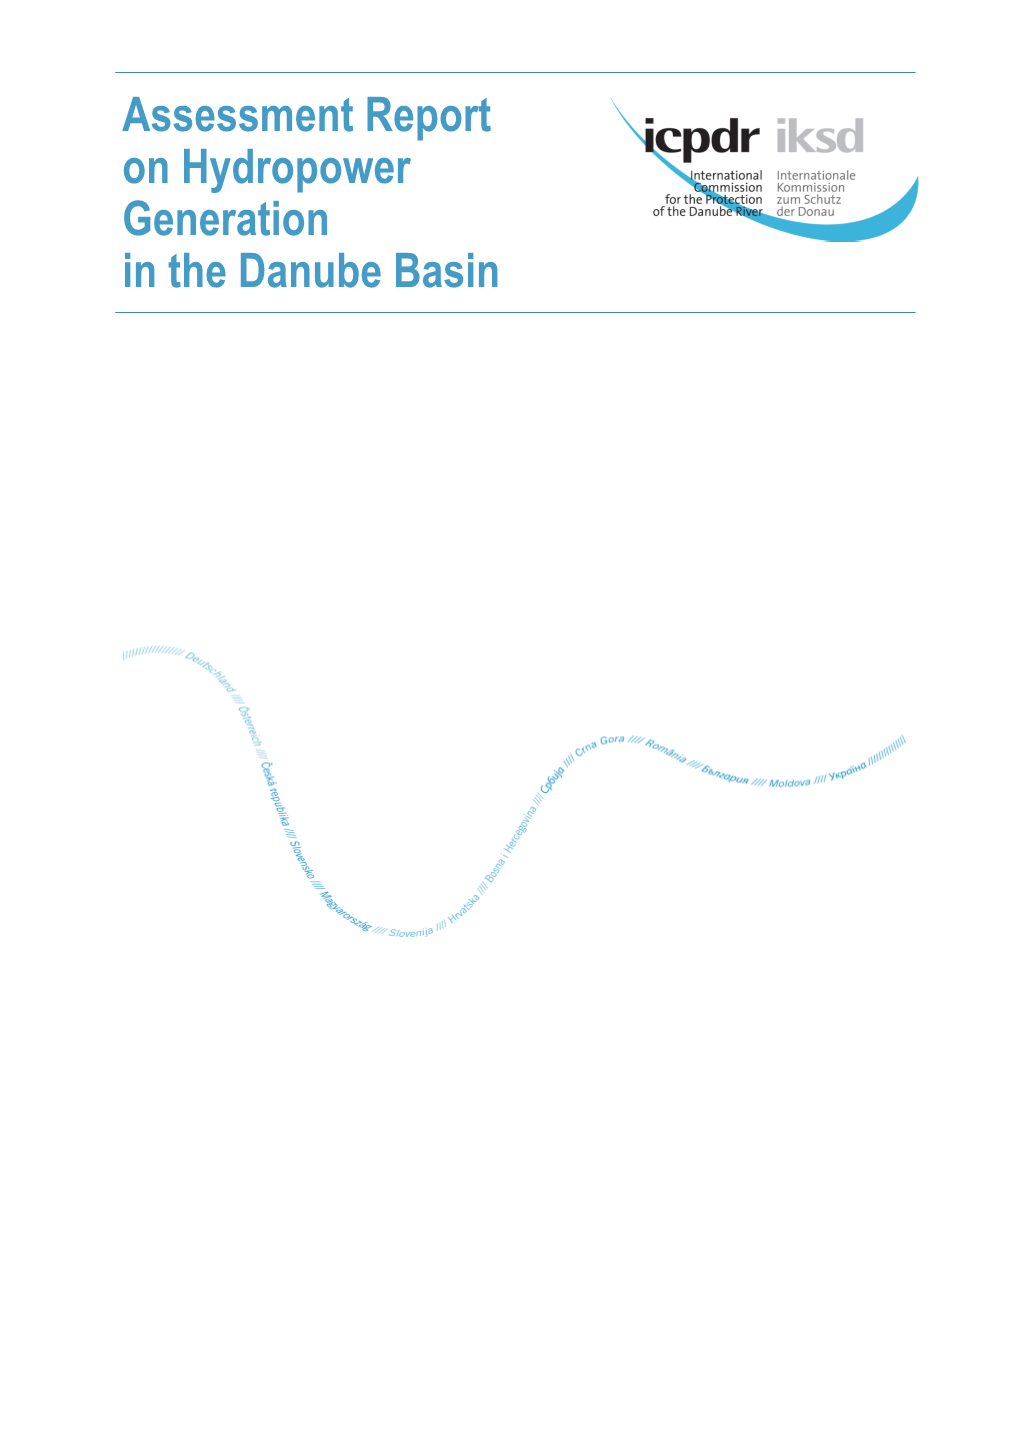 Assessment Report on Hydropower Generation in the Danube Basin